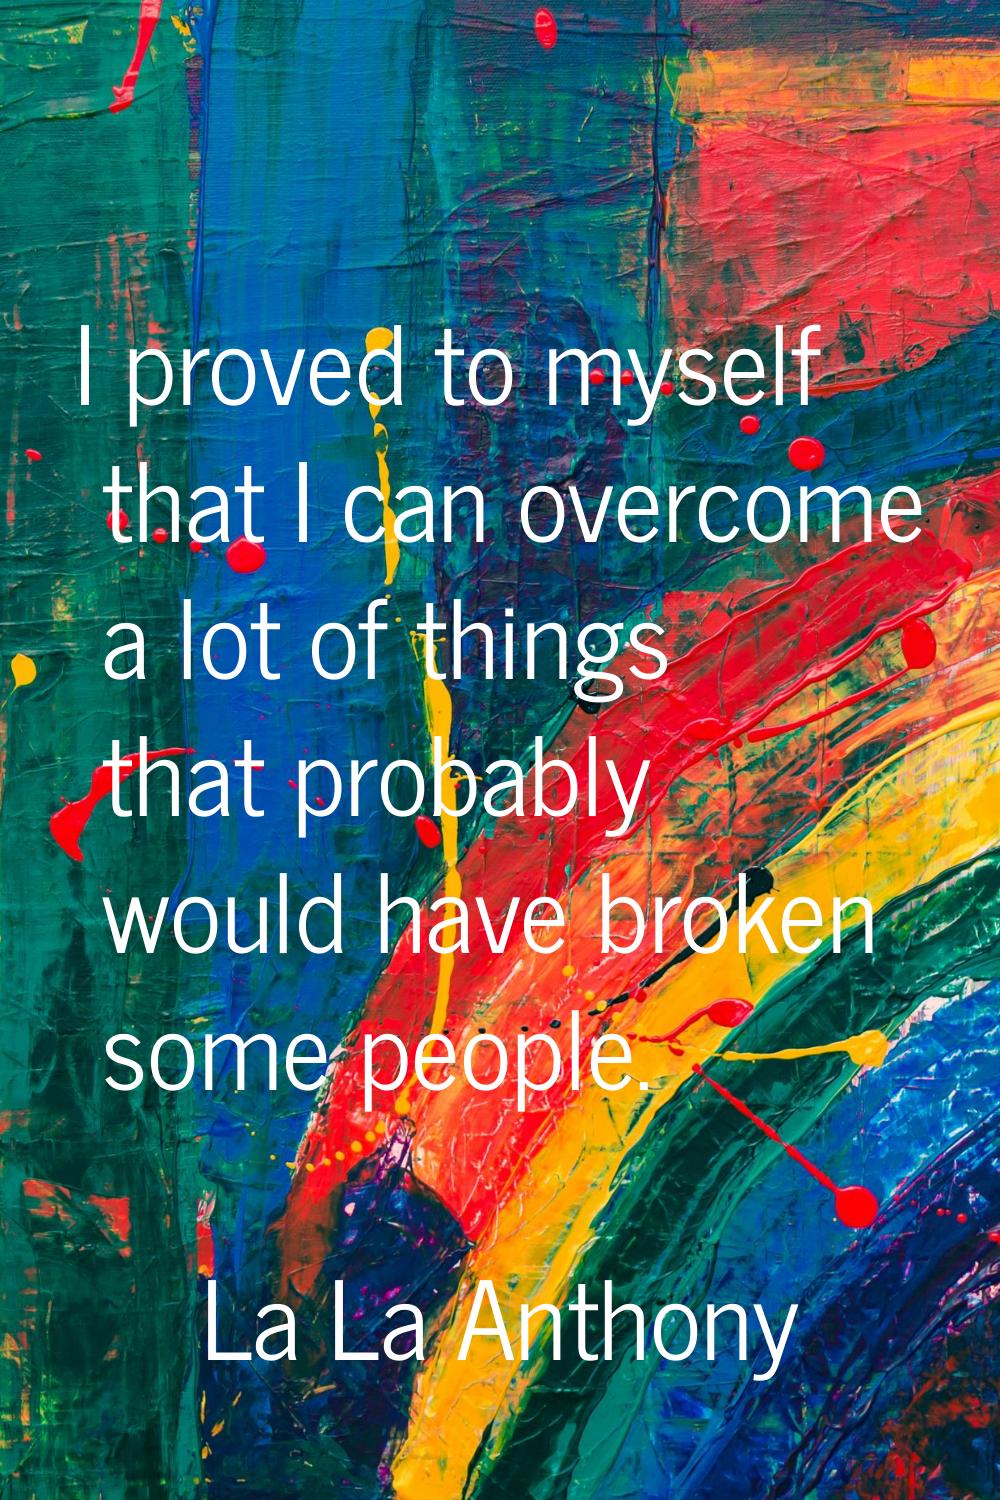 I proved to myself that I can overcome a lot of things that probably would have broken some people.